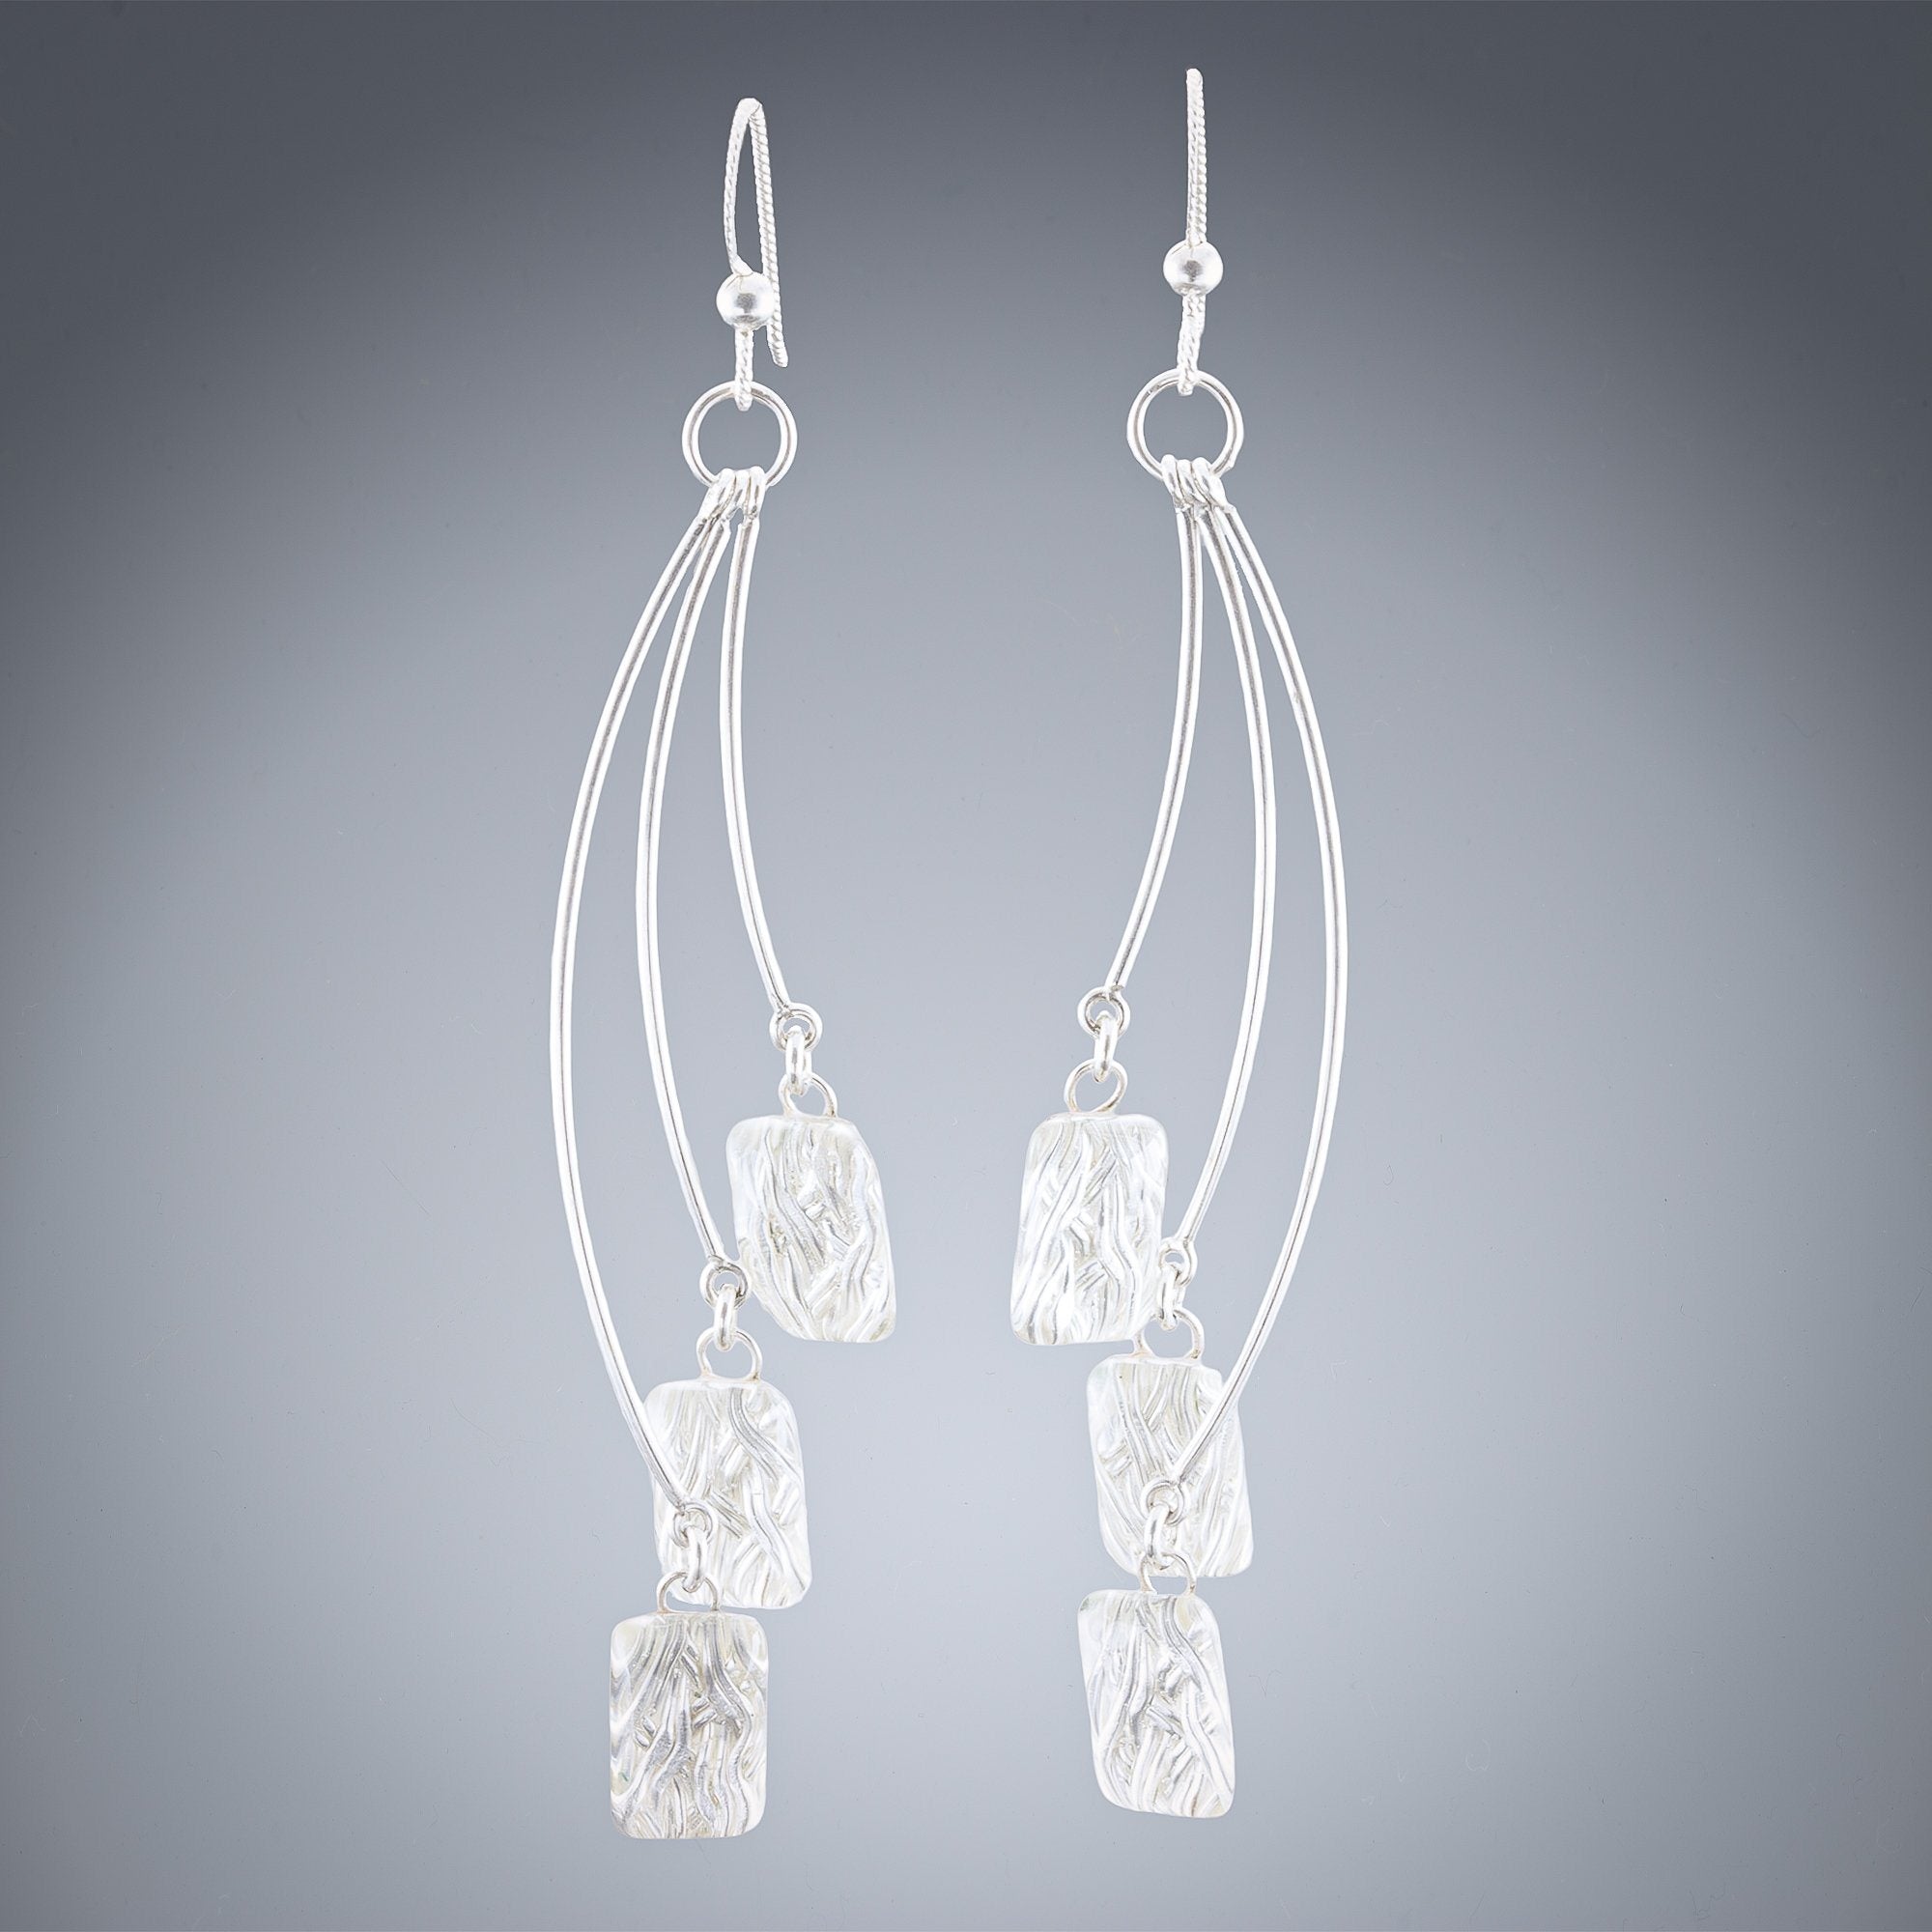 Sparkly Cascading Earrings with Handwoven Metal Fabric and Glass in Silver